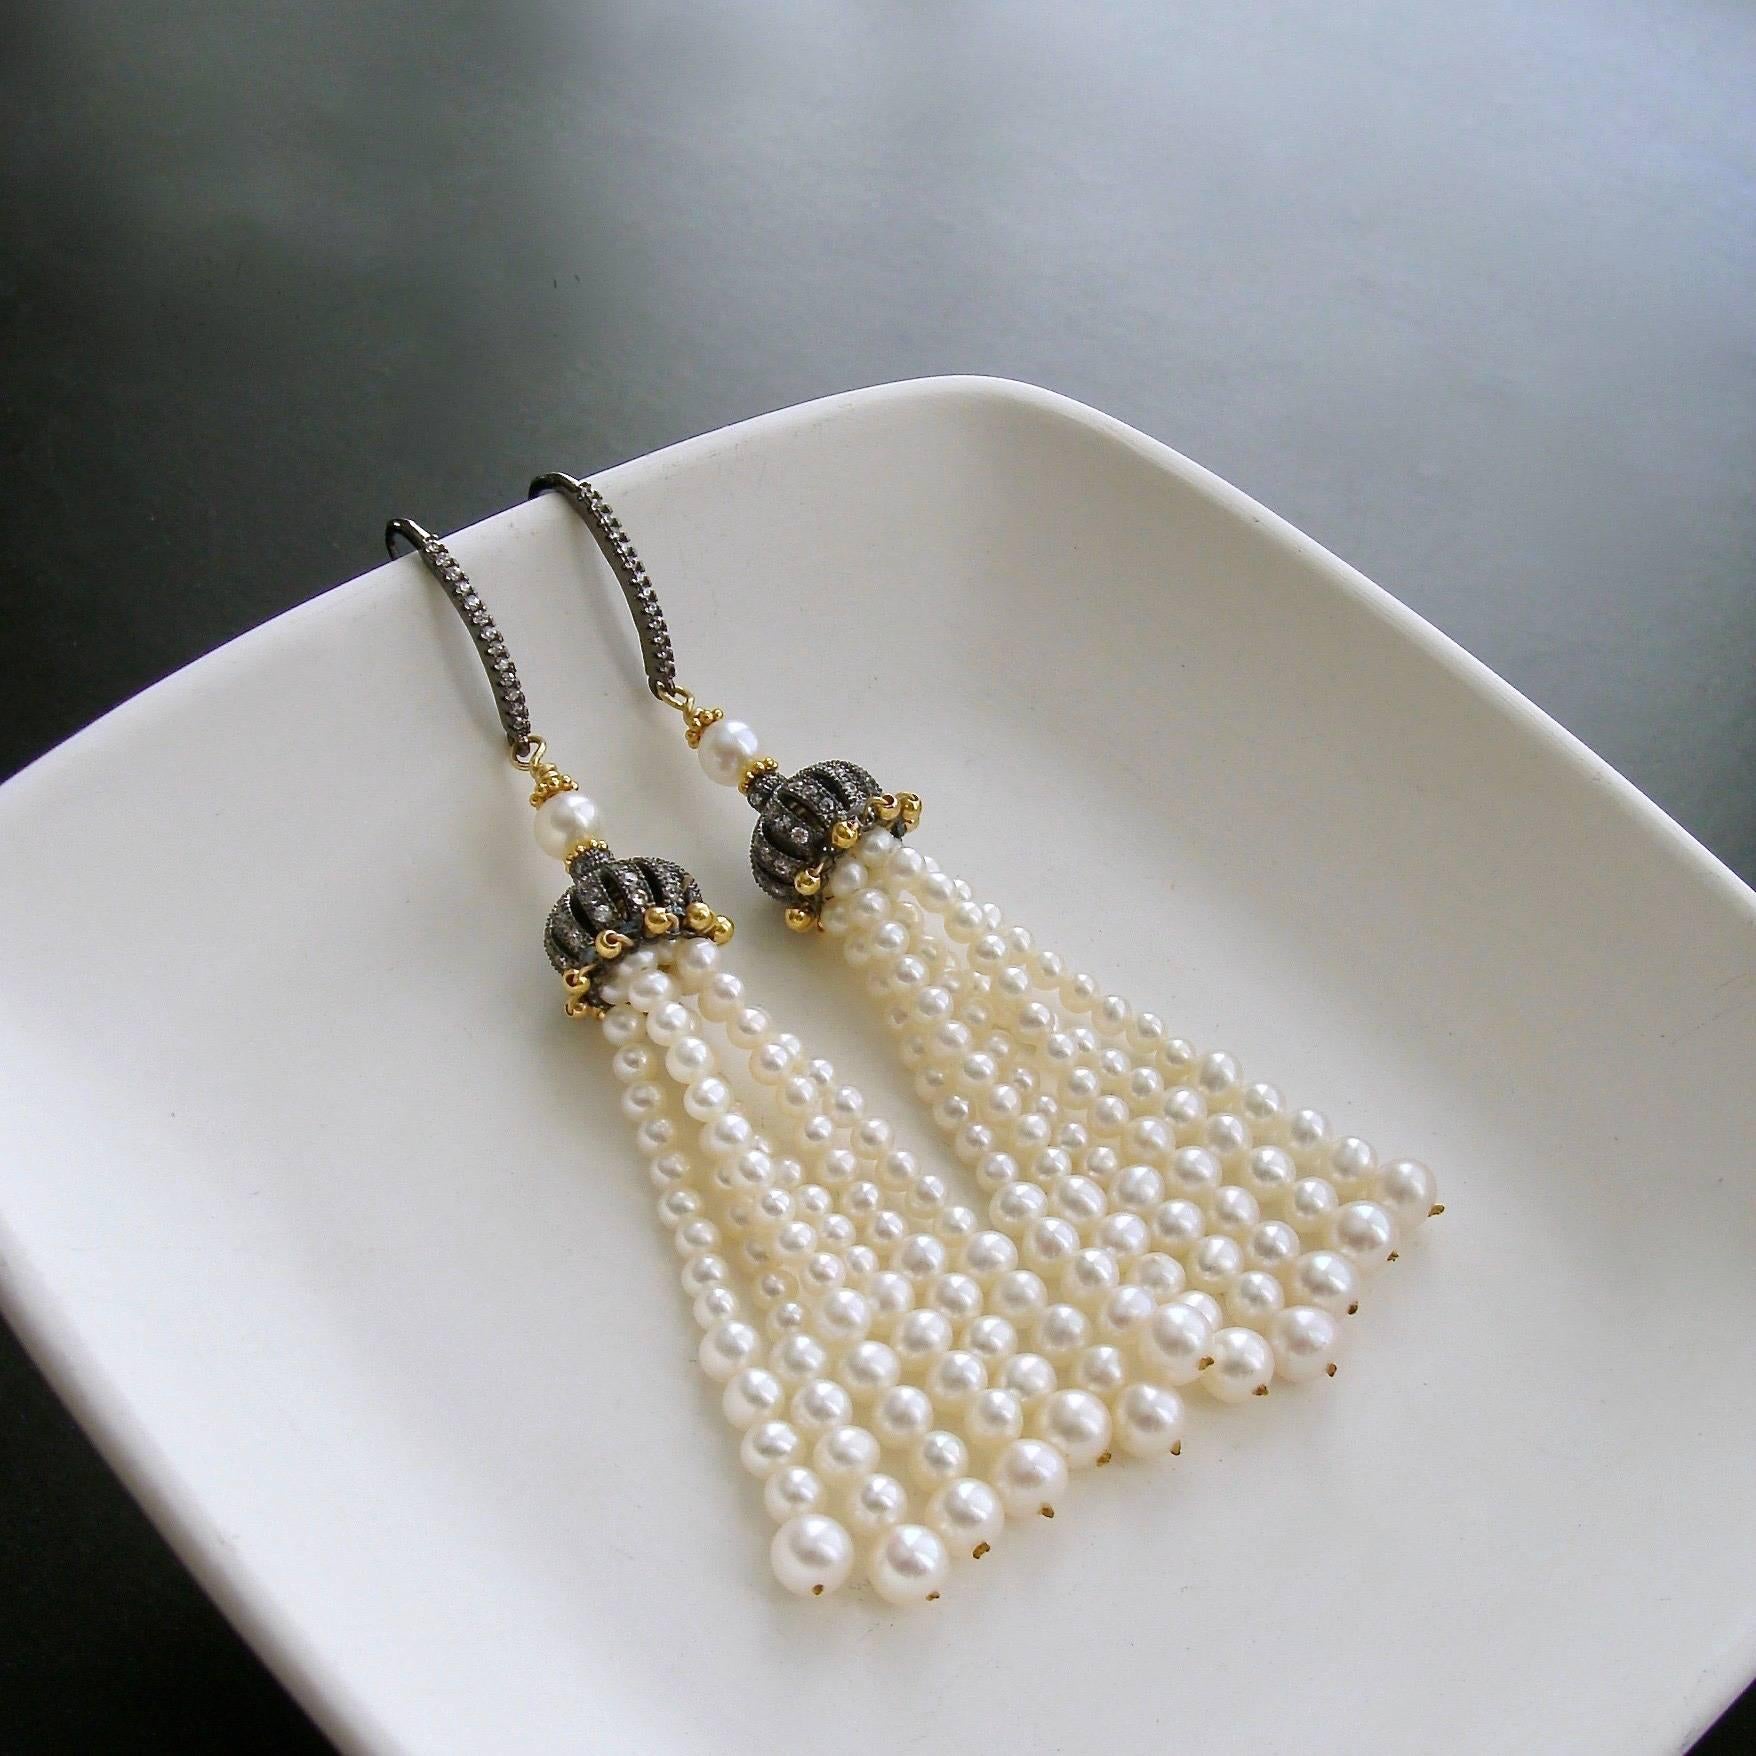 Anais Earrings.

Graduated candlelight pearls create a mesmerizing tassel that is much more than just a little flattering.  This is Boho Chic at its finest - elegant and intriguing as the pearl strands sway with your every movement.  A clever little